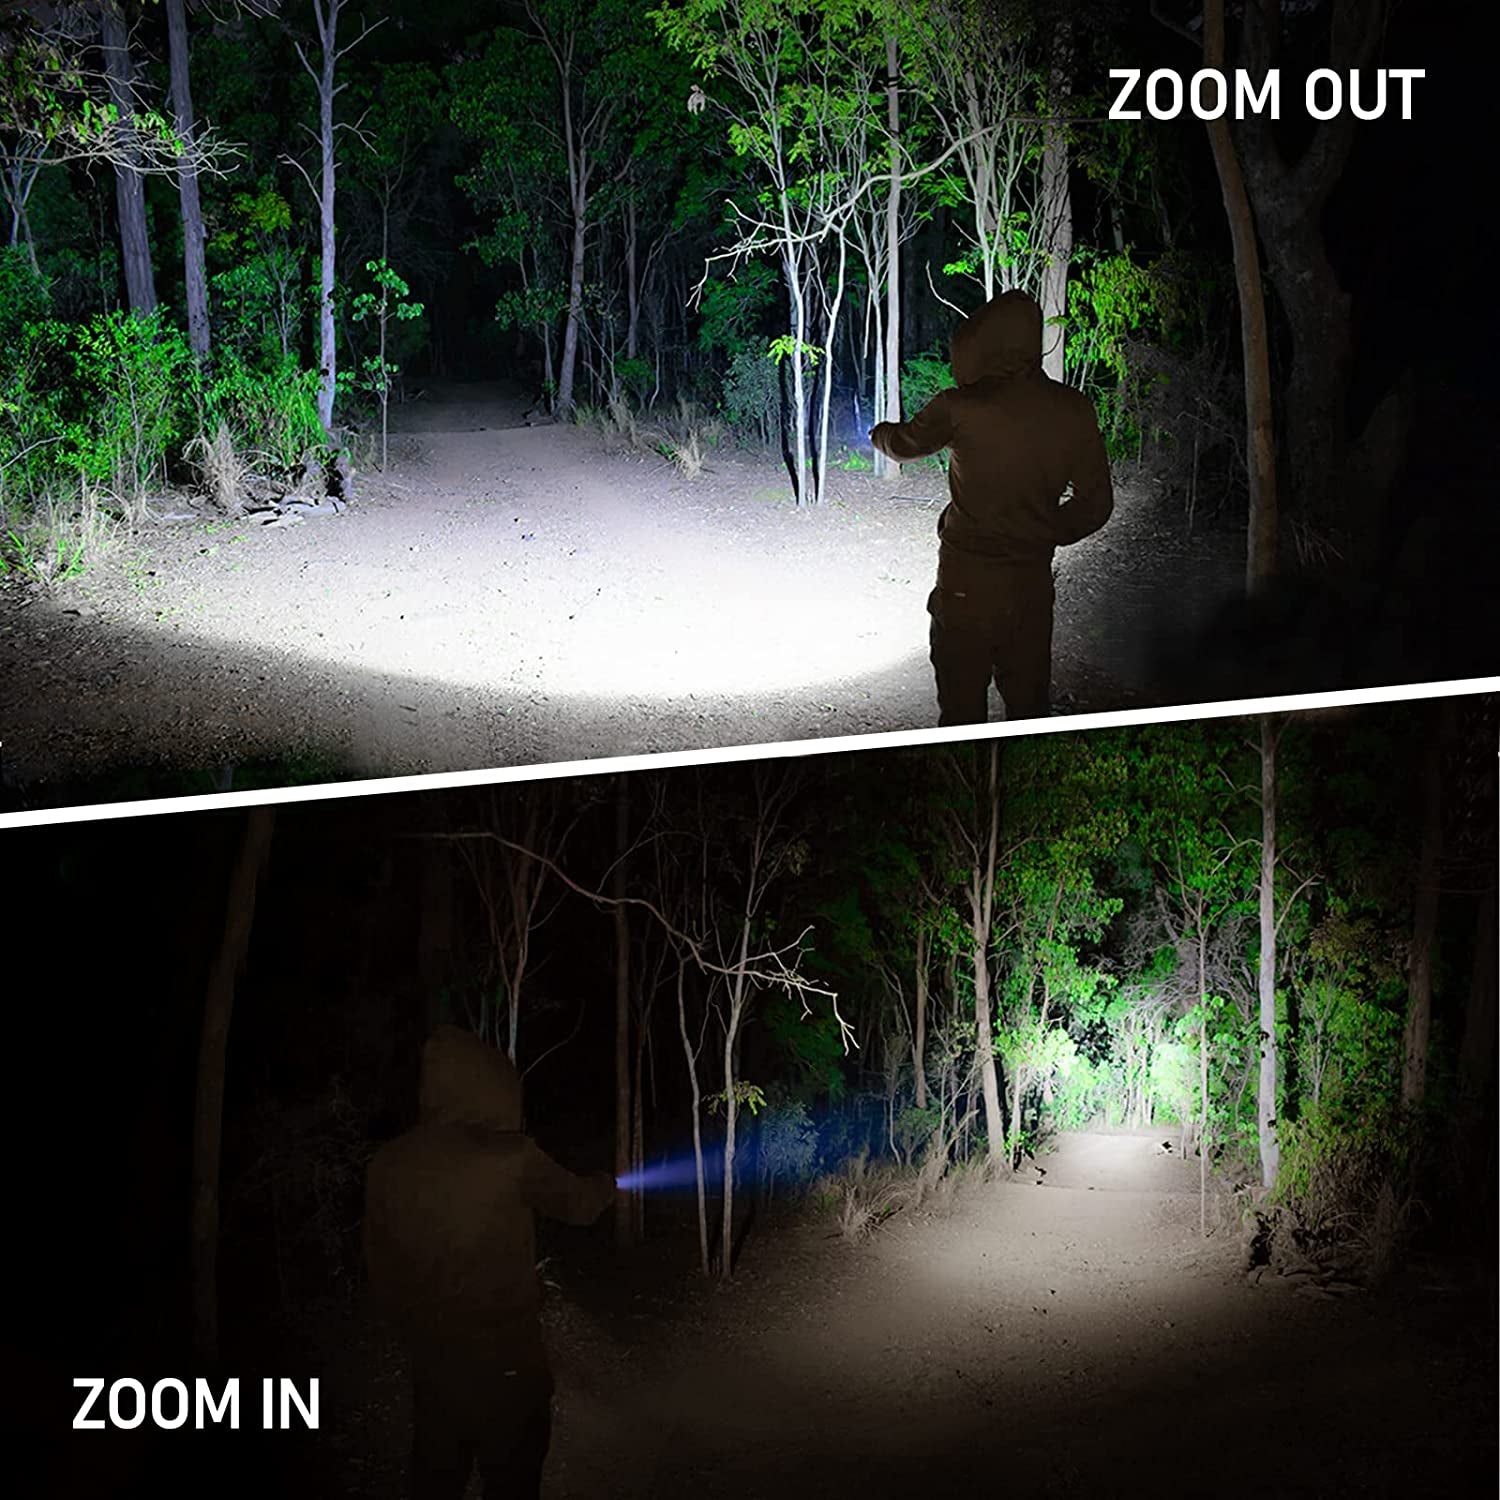 Flashlights Rechargeable, 2000L High Lumens Tactical Flashlight,Super Bright Small LED Flash Light-Zoomable,Adjustable Brightness,Long Lasting for Camping,Outdoors,Christmas Gifts Men&Women